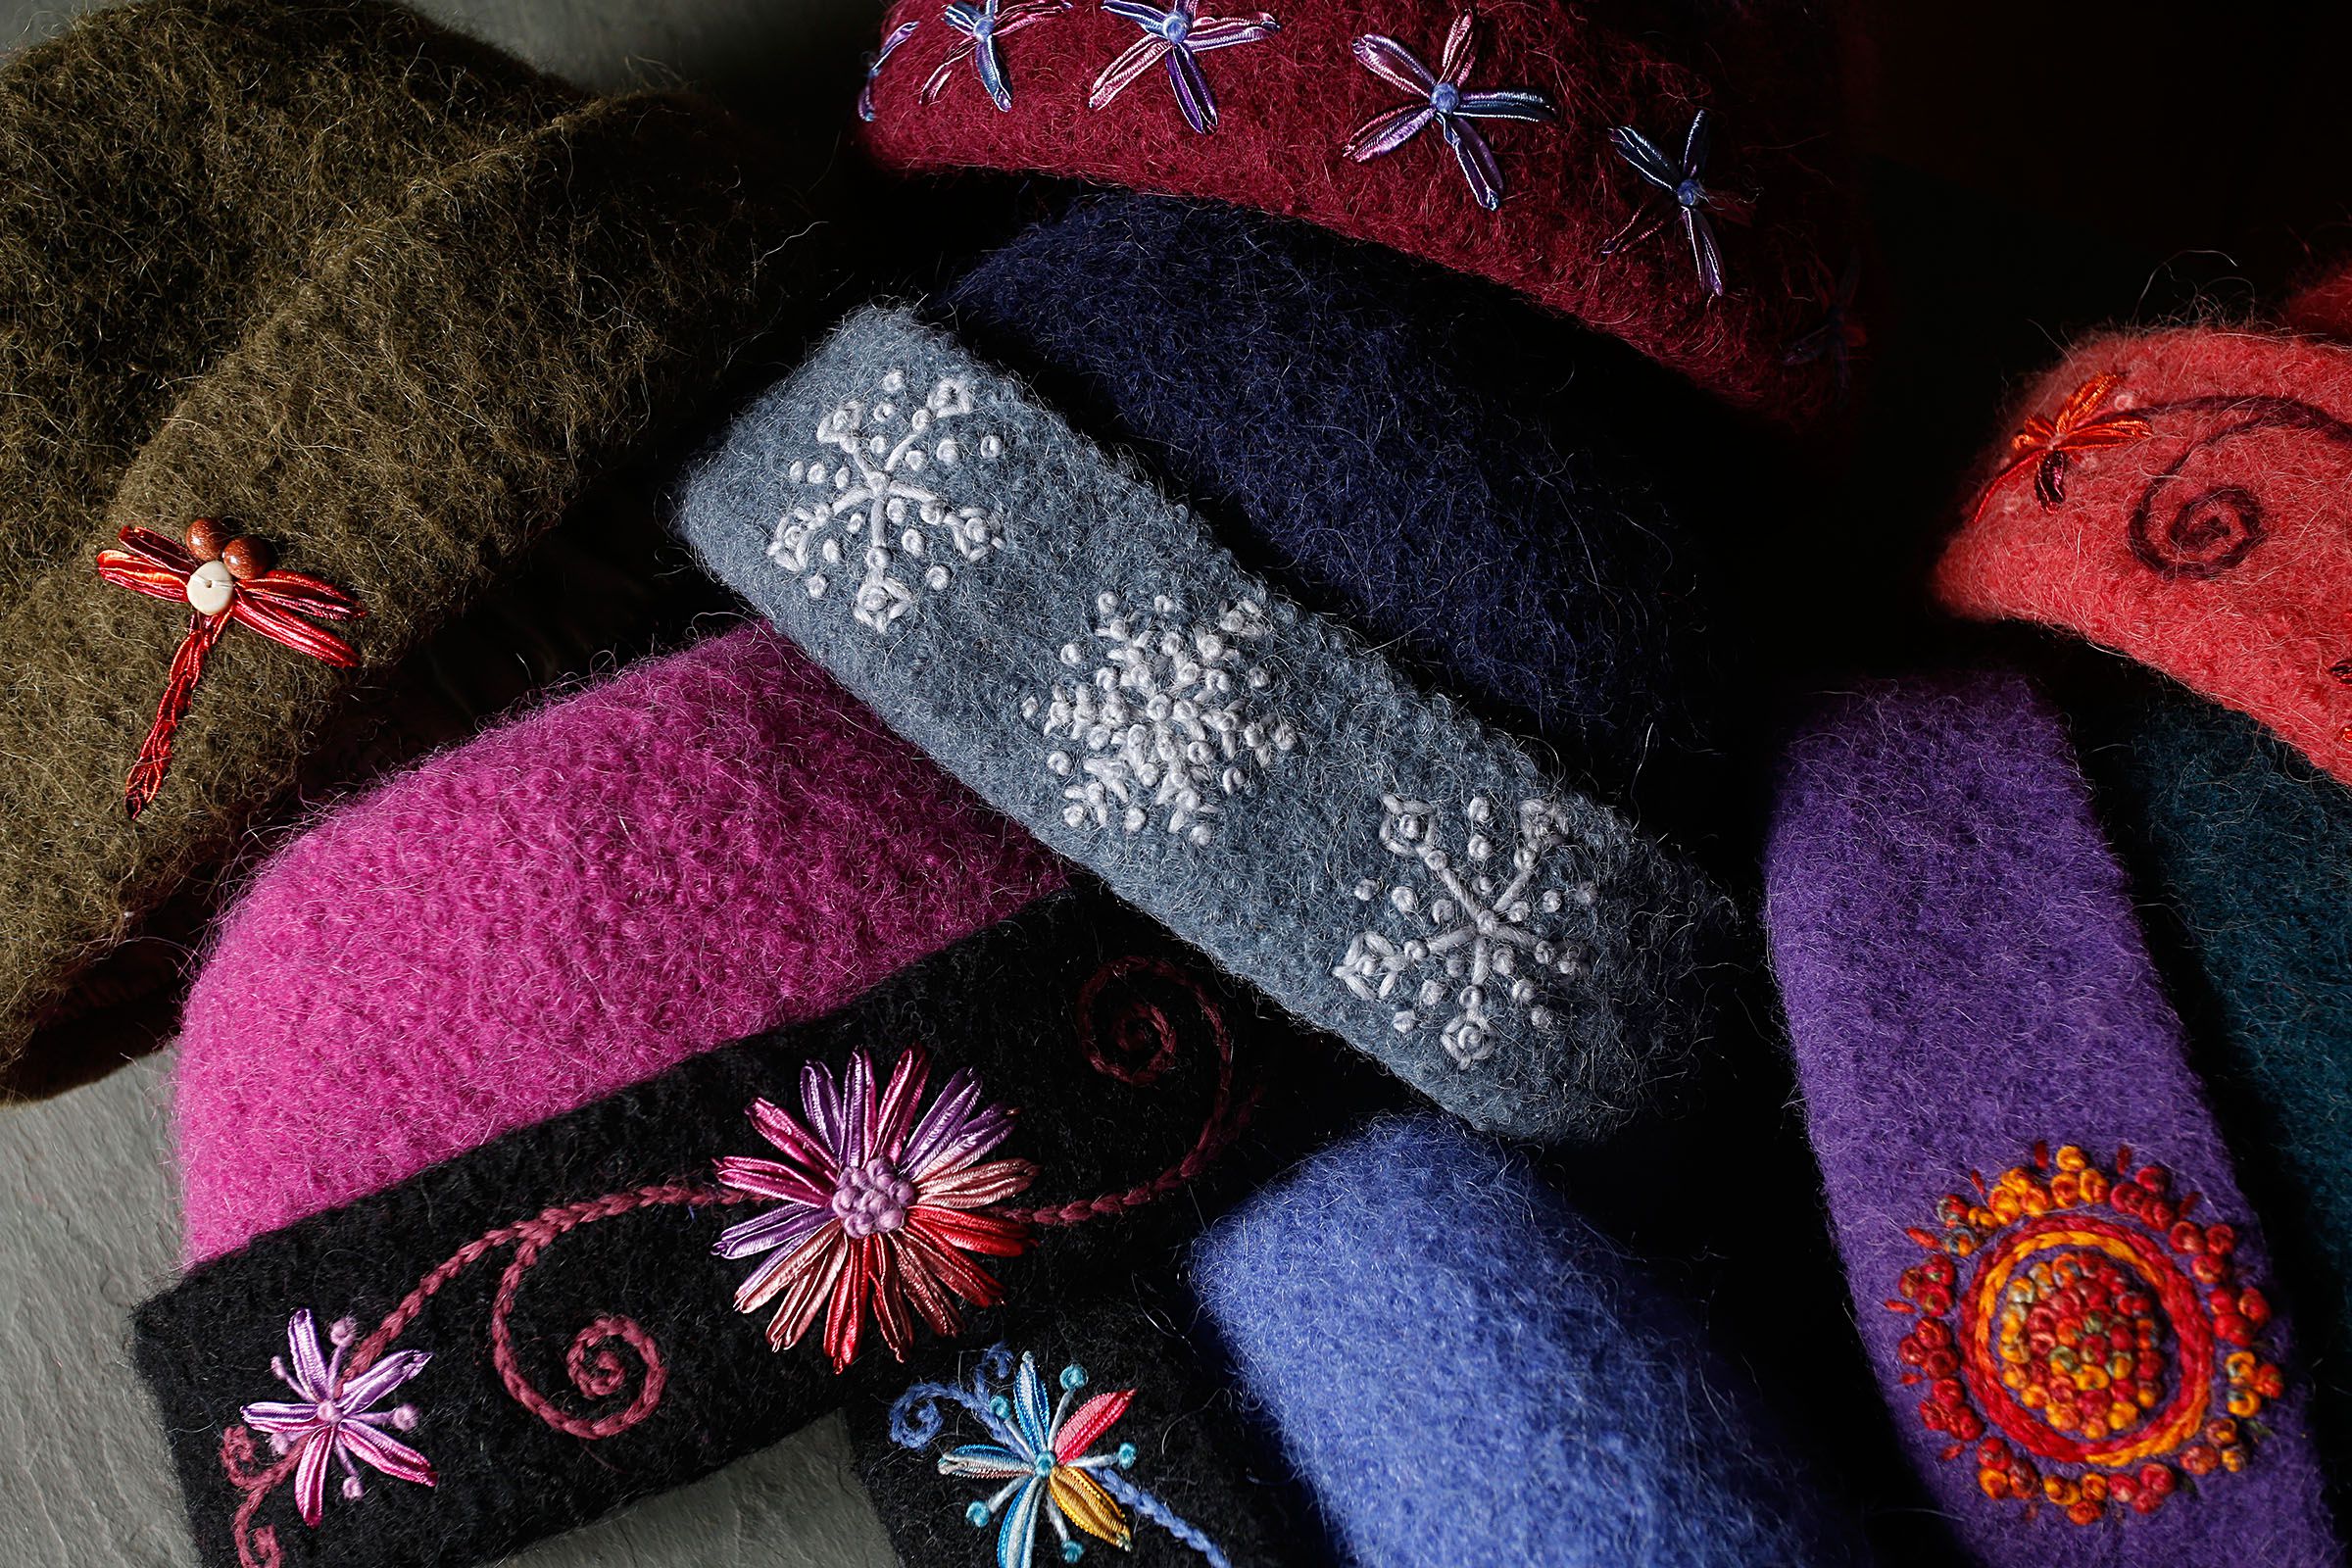 A collection of heirloom handknit hats at Carrie Cahill Mulligan's home studio in Canaan, N.H., on November 18, 2016. With the help of home knitters, Cahill Mulligan is now producing about 150 hats a year. (Valley News - Geoff Hansen) Copyright Valley News. May not be reprinted or used online without permission. Send requests to permission@vnews.com.